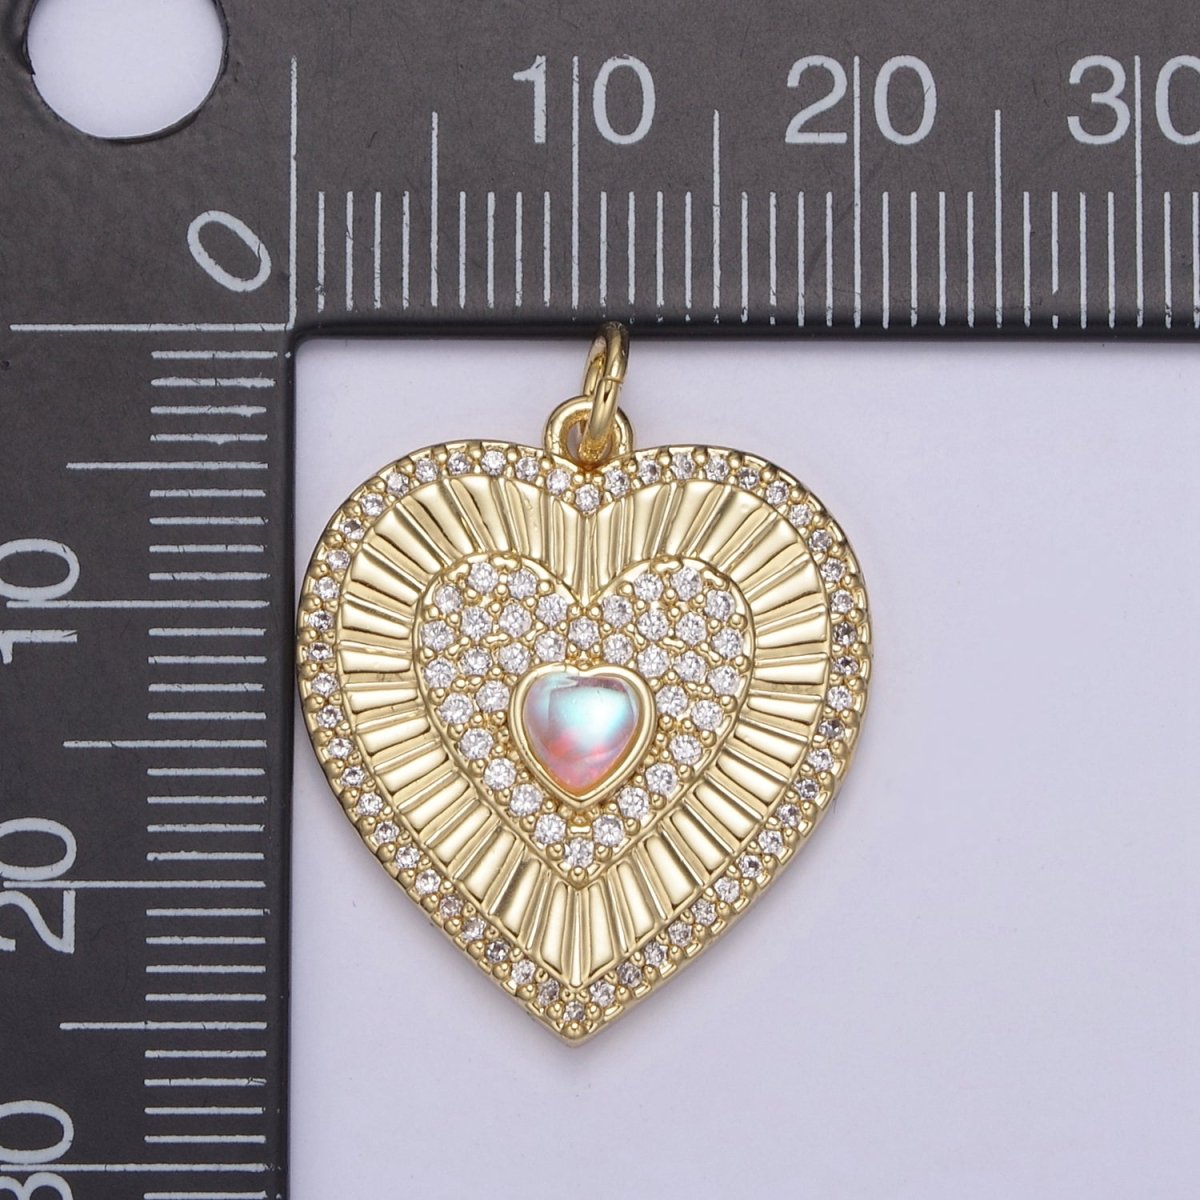 Gold Filled Radial Heart Charm Necklace, Rainbow Moonstone Sunburst Gold Pendant, Dainty Heart Love Valentine Gift Necklace Supply N-689 N-765 - DLUXCA